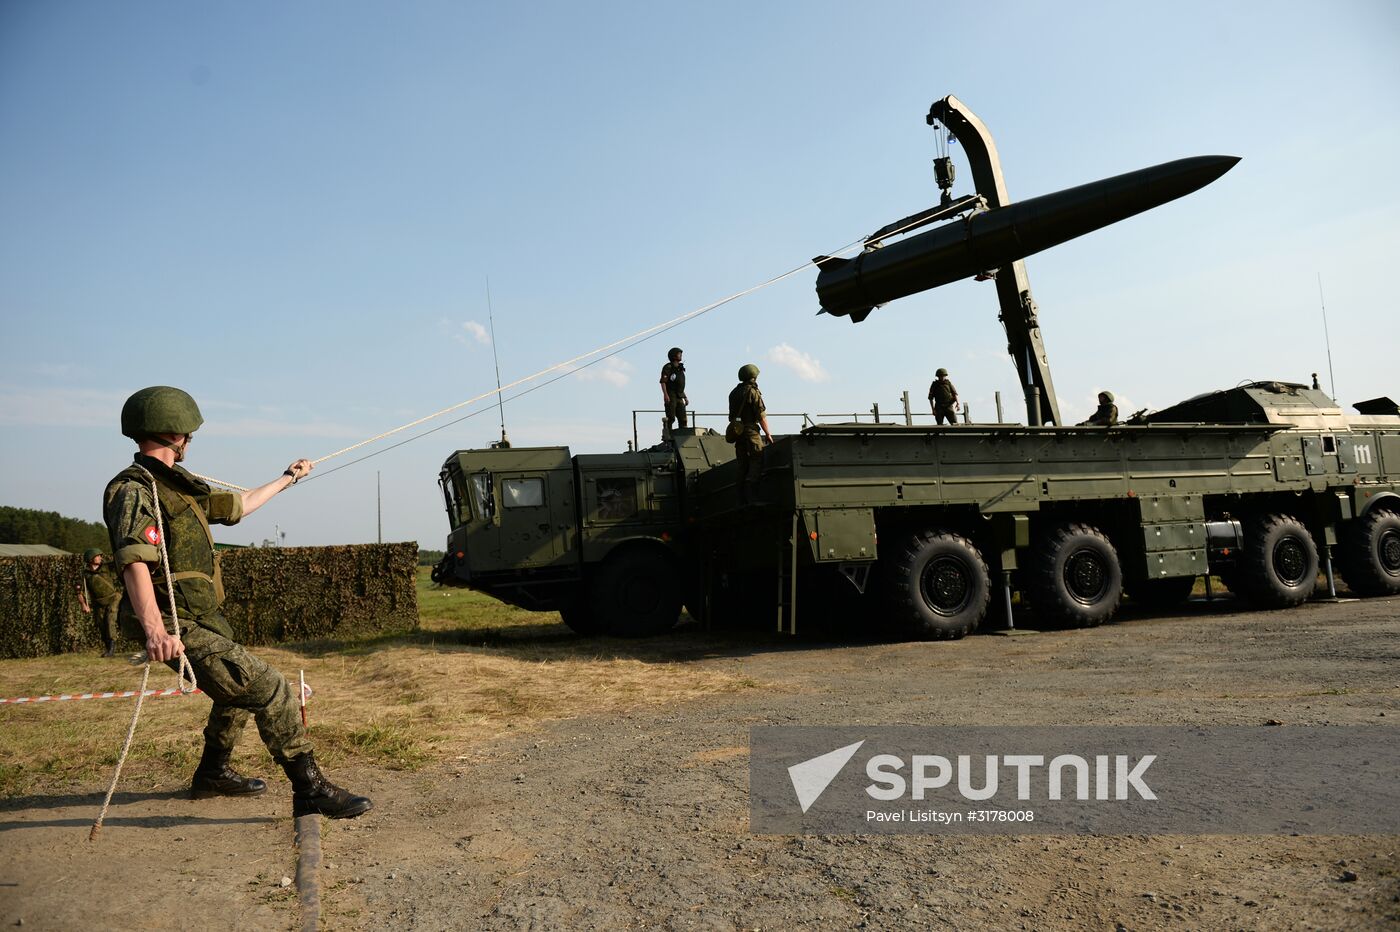 Show of weaponry at the Army 2017 International Military-Technical Forum in Sverdlovsk Region